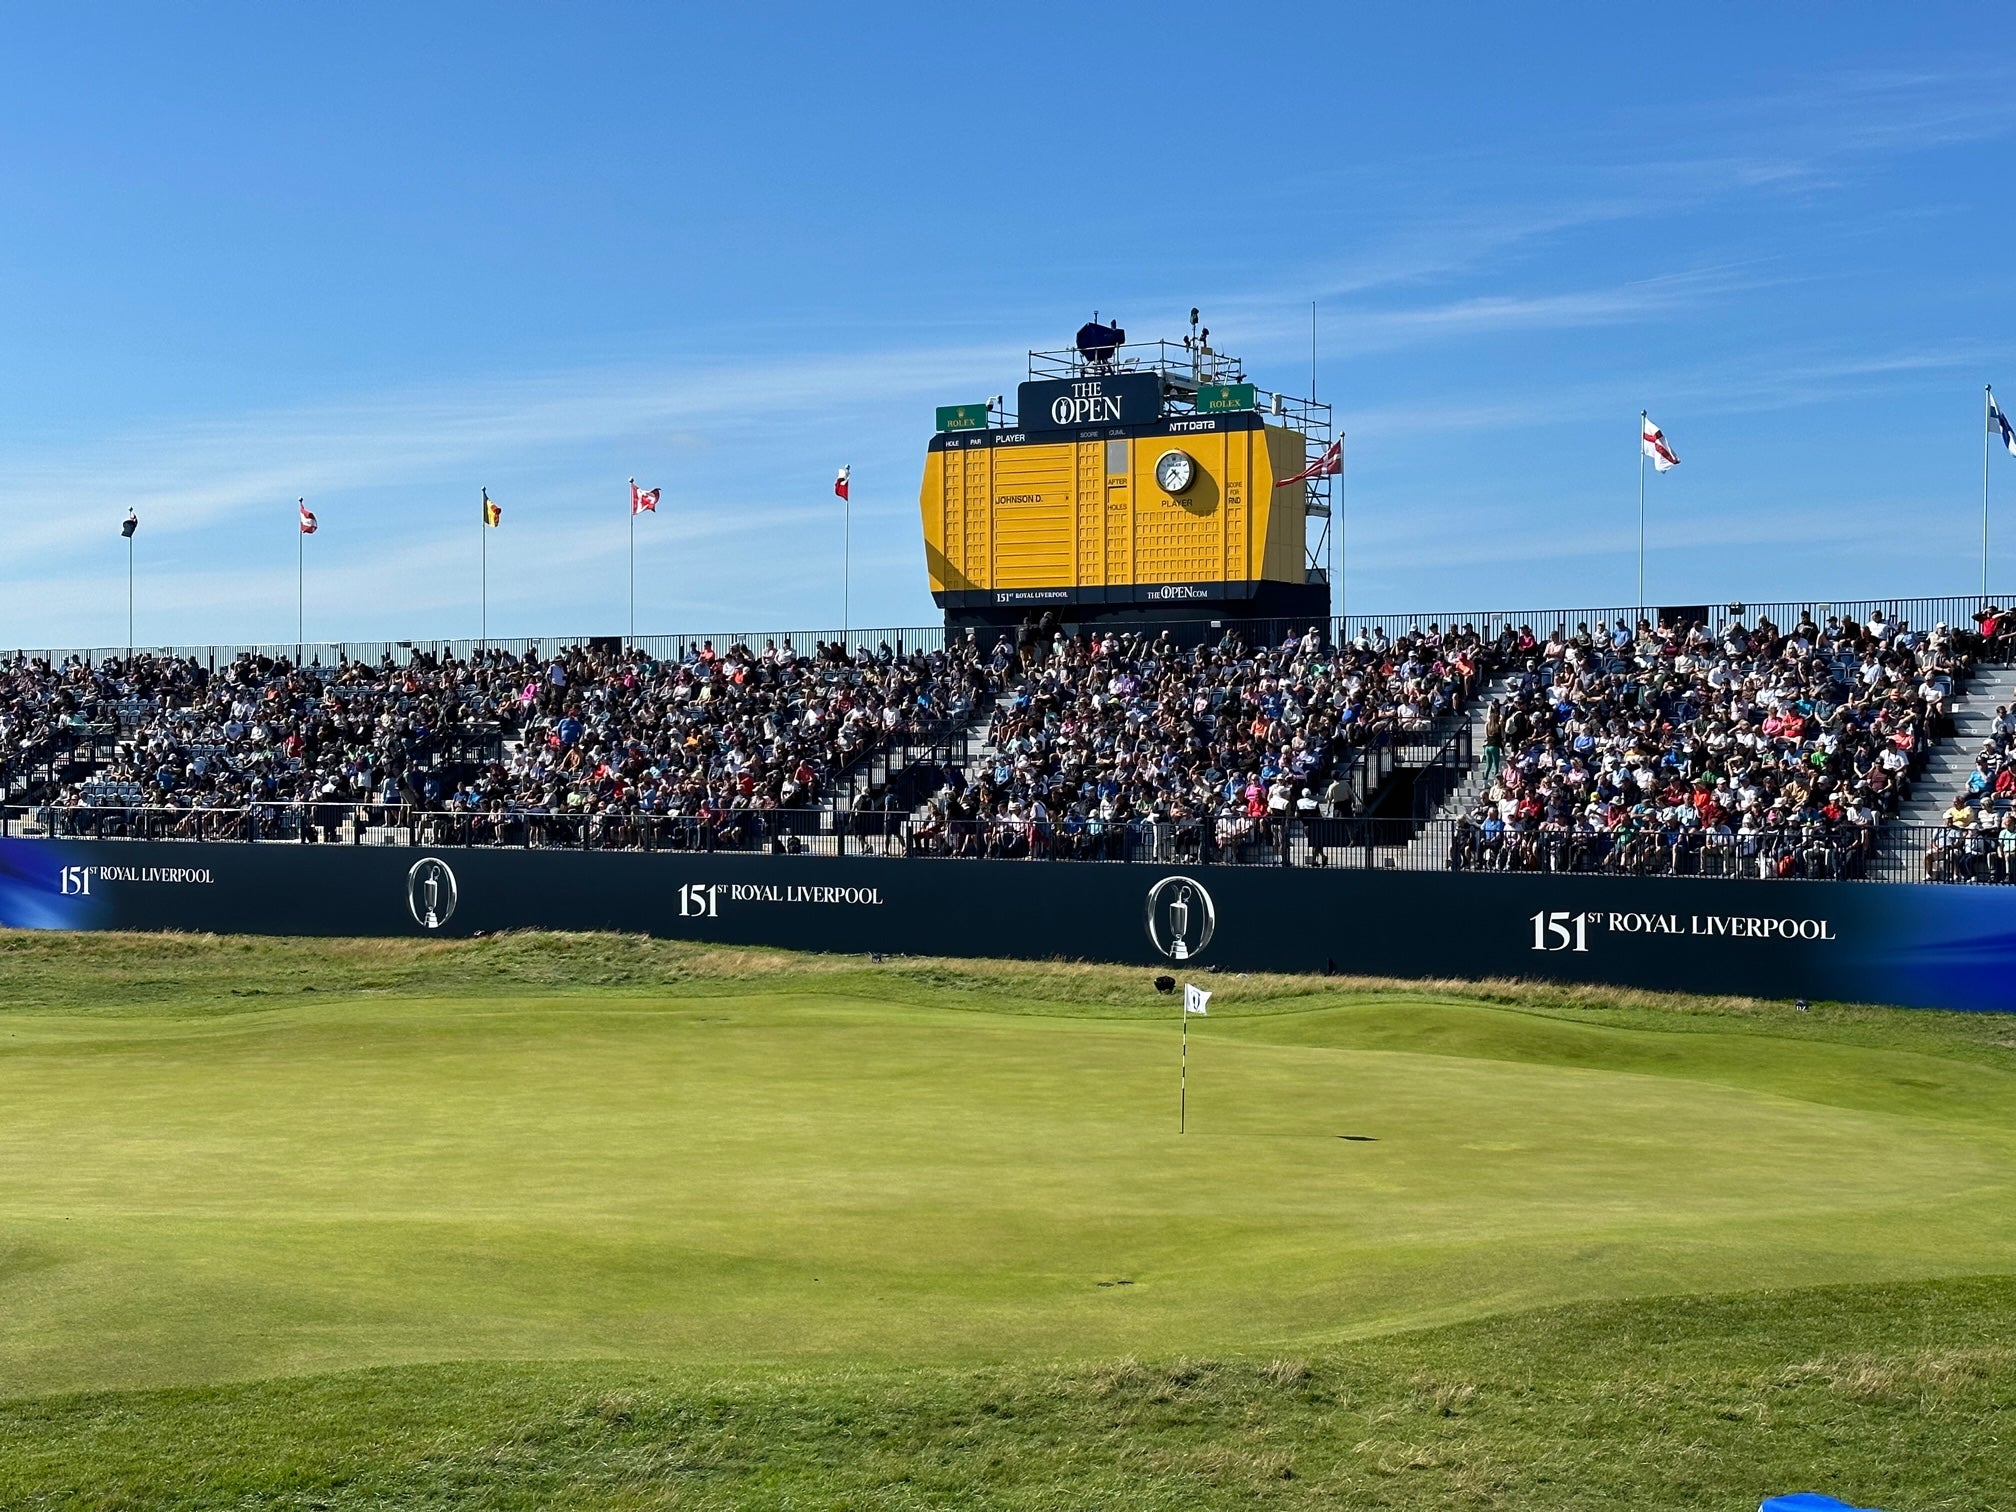 Our visit to the 151st Open